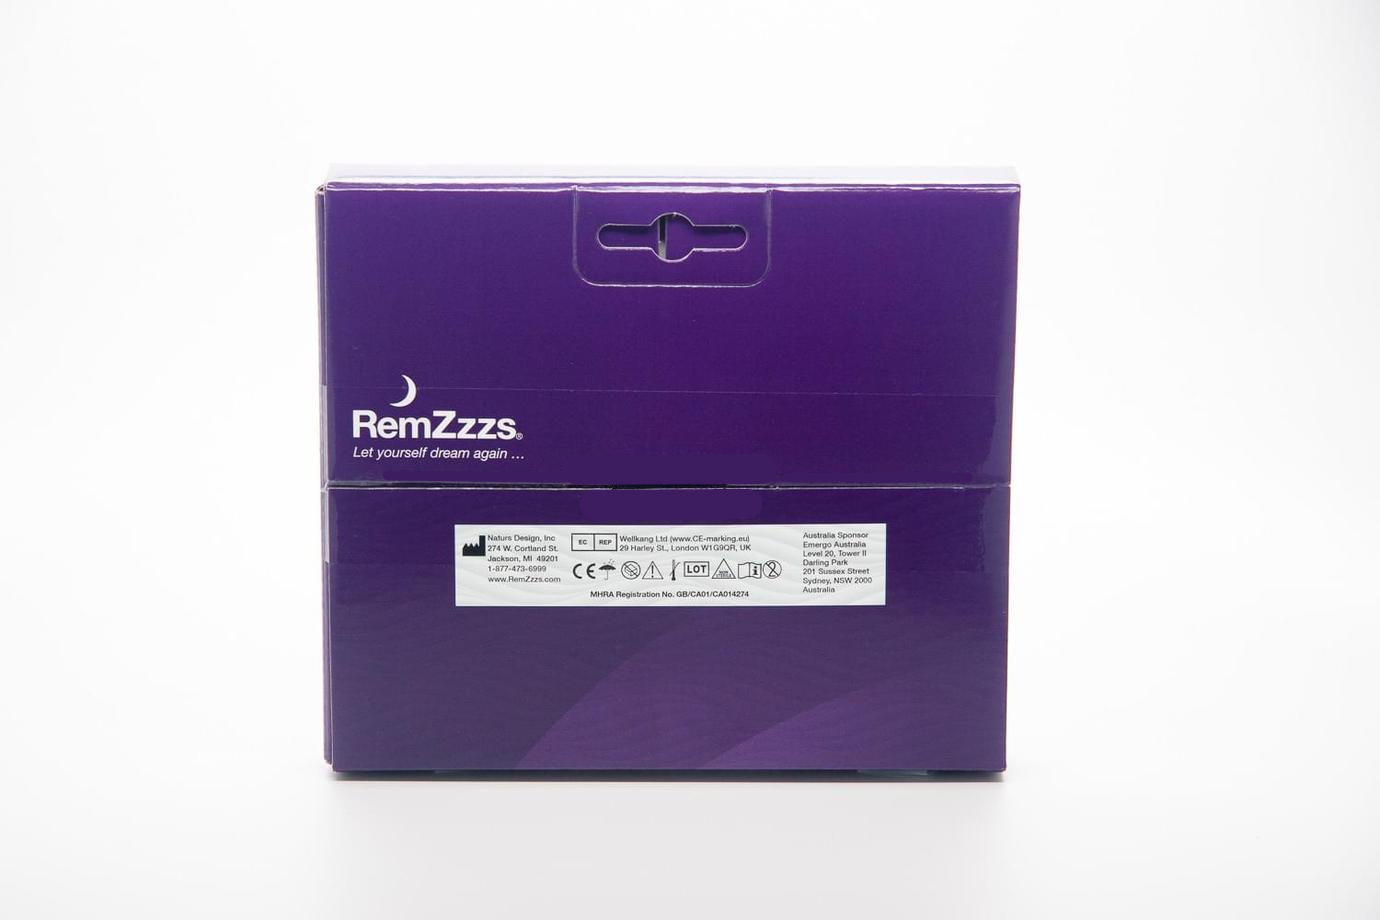 RemZzzs full face mask liners 30 units view of the box back side